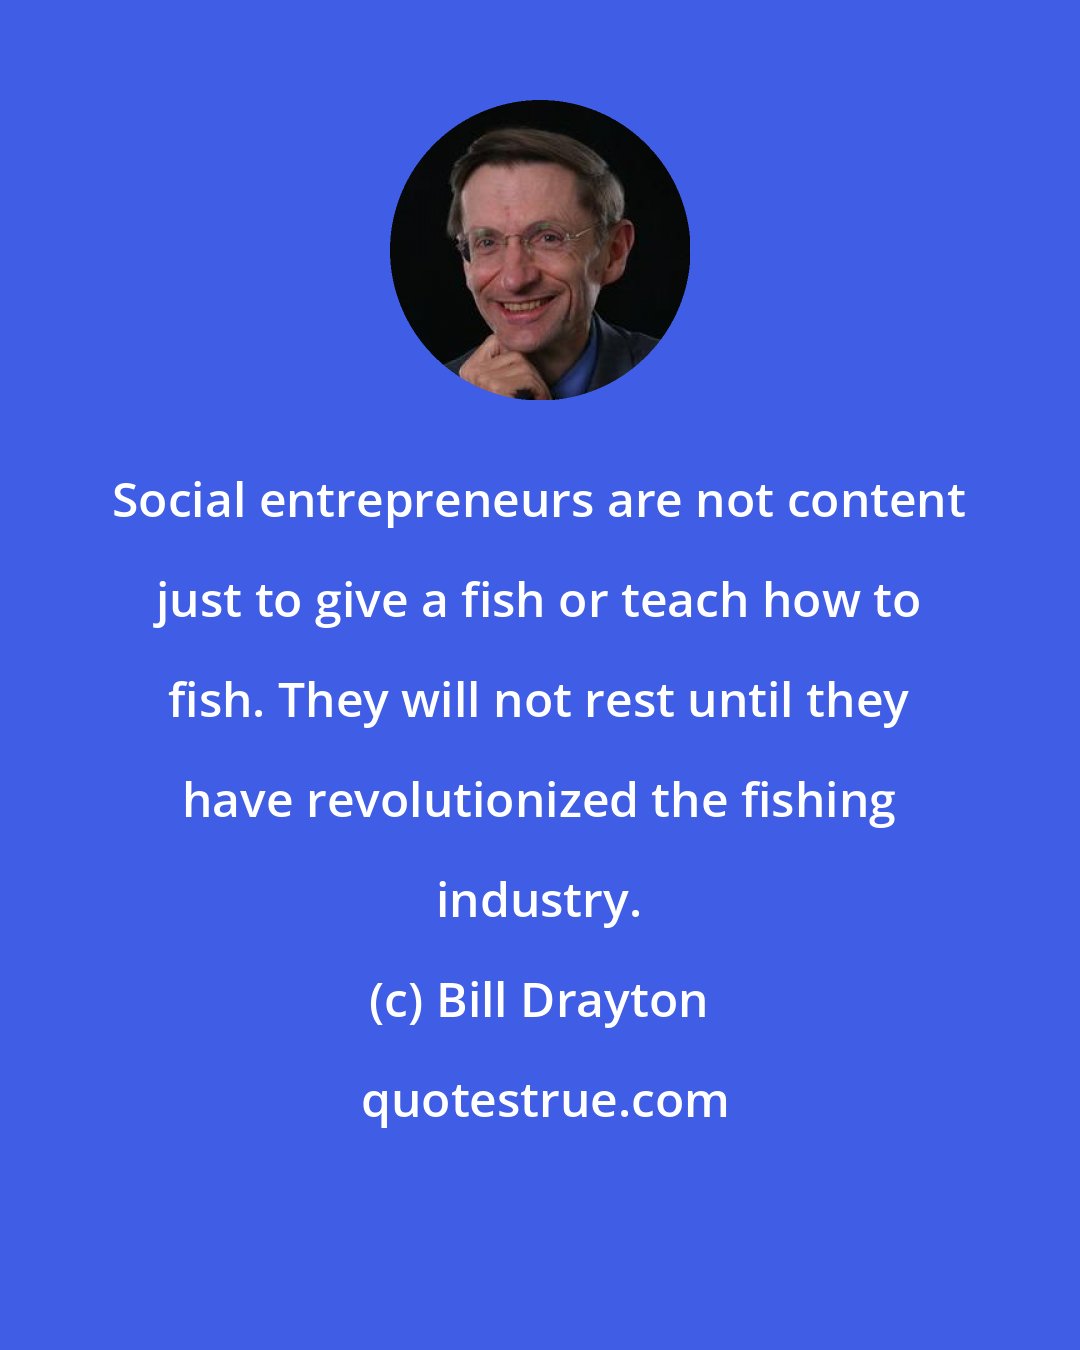 Bill Drayton: Social entrepreneurs are not content just to give a fish or teach how to fish. They will not rest until they have revolutionized the fishing industry.